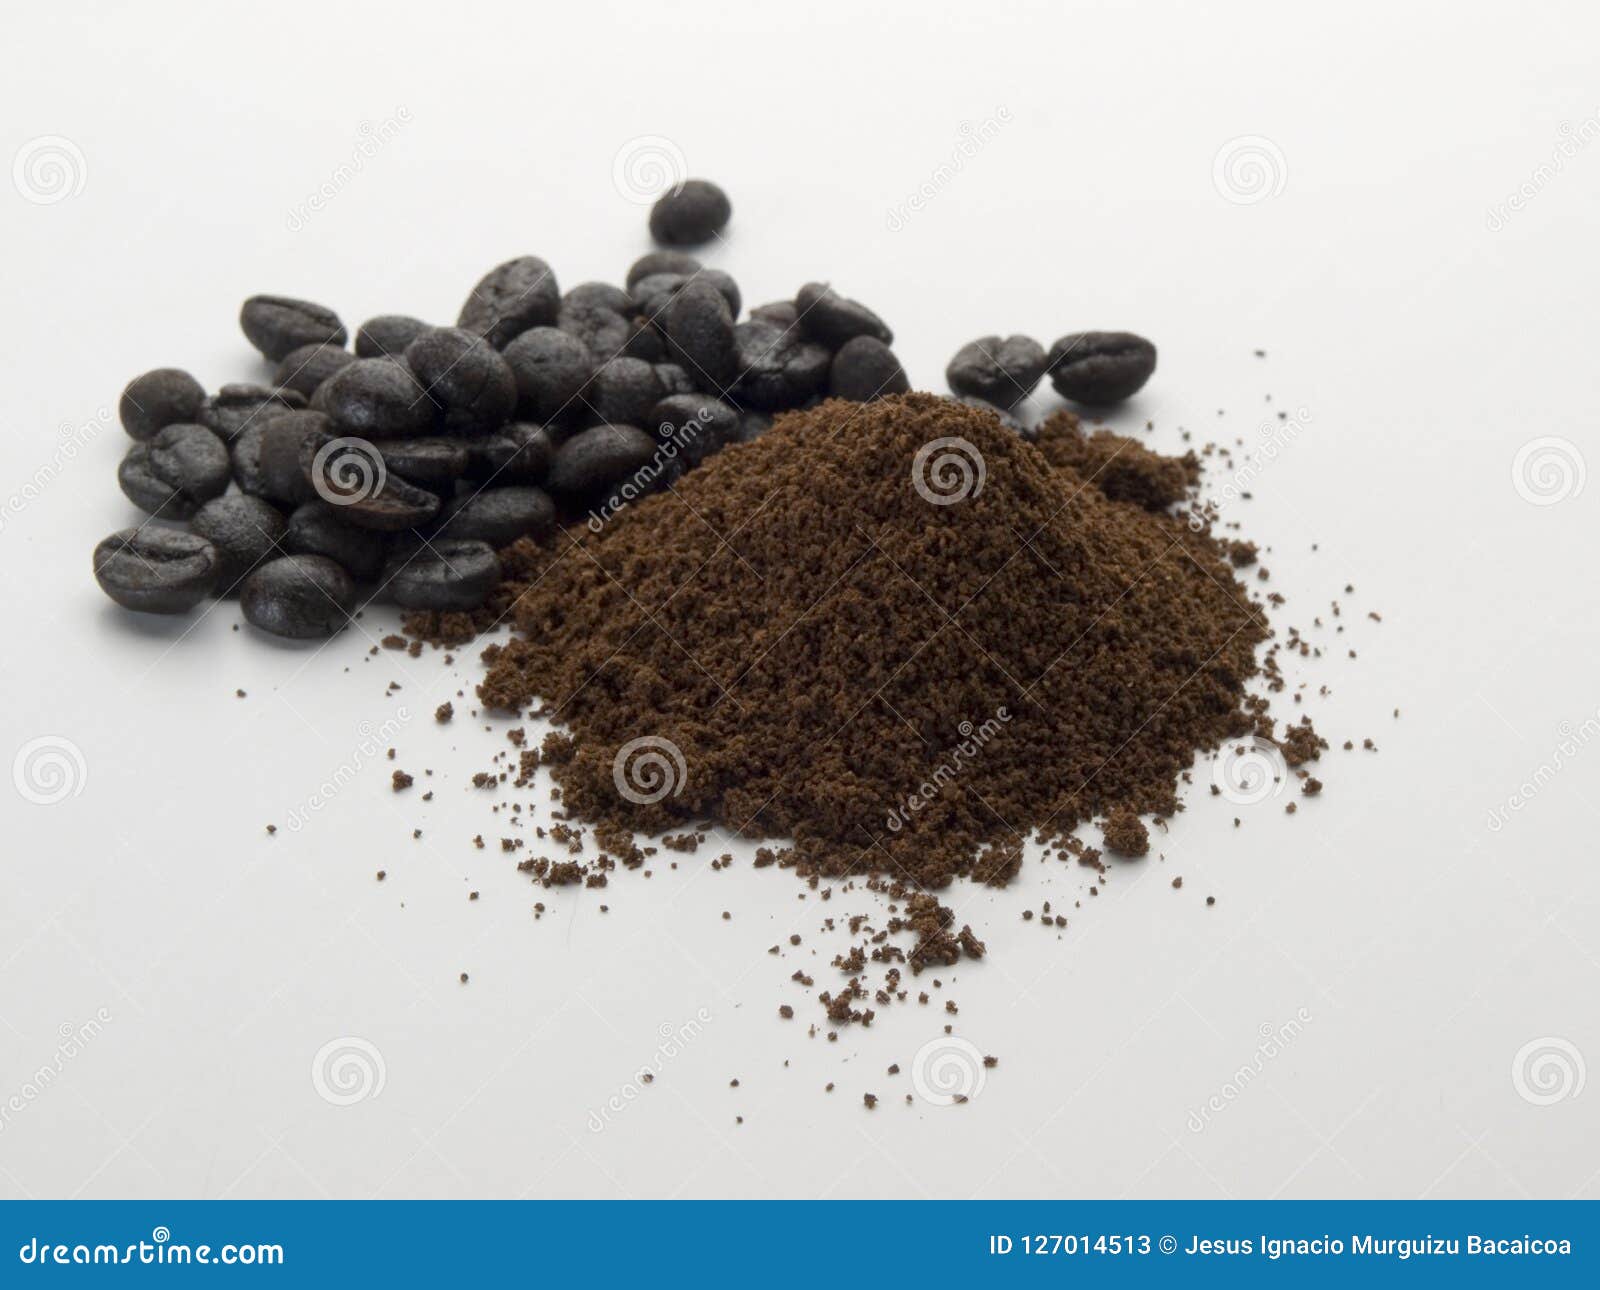 mountain in the foreground of ground coffee and loose grains 2